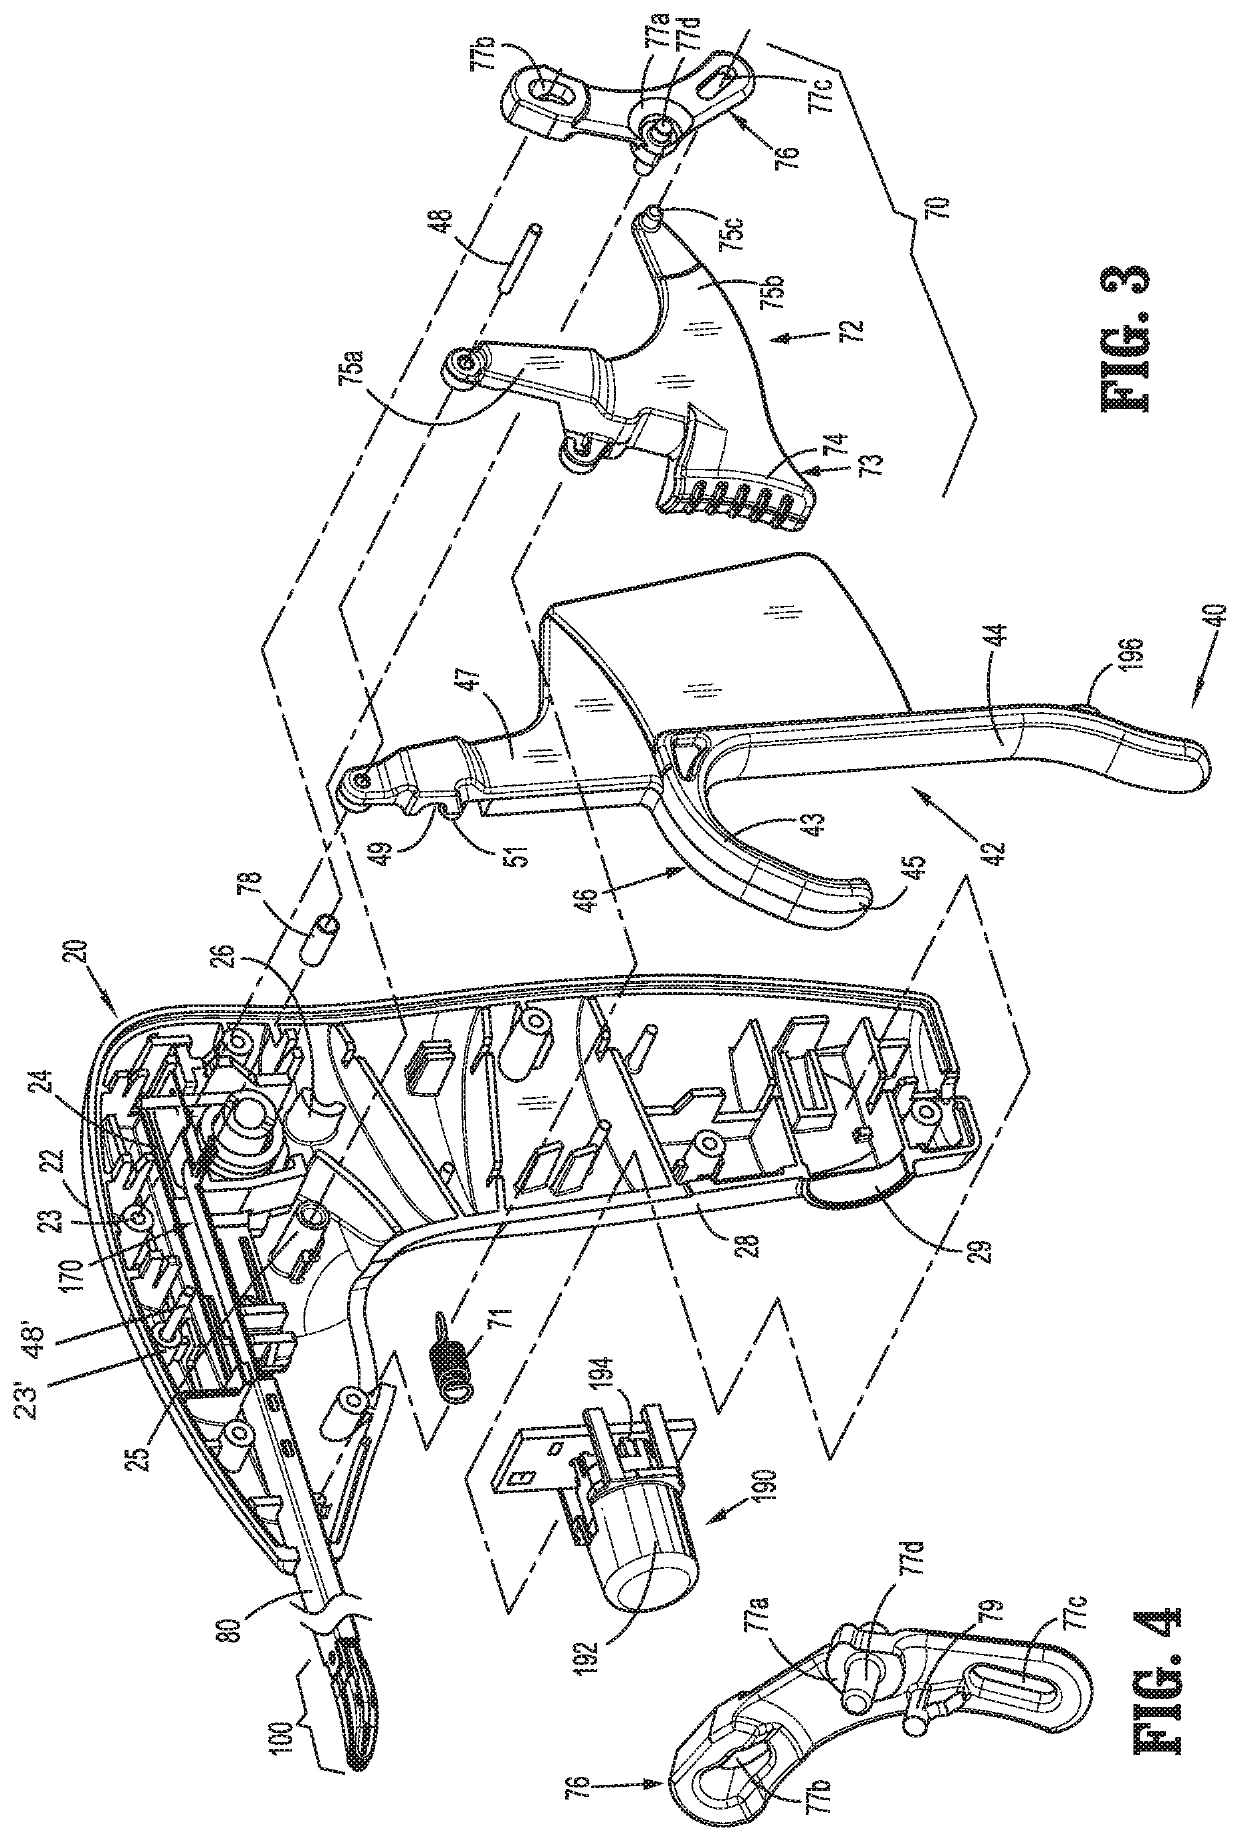 Surgical instruments and methods of manufacturing surgical instruments for performing tonsillectomy, adenoidectomy, and other surgical procedures